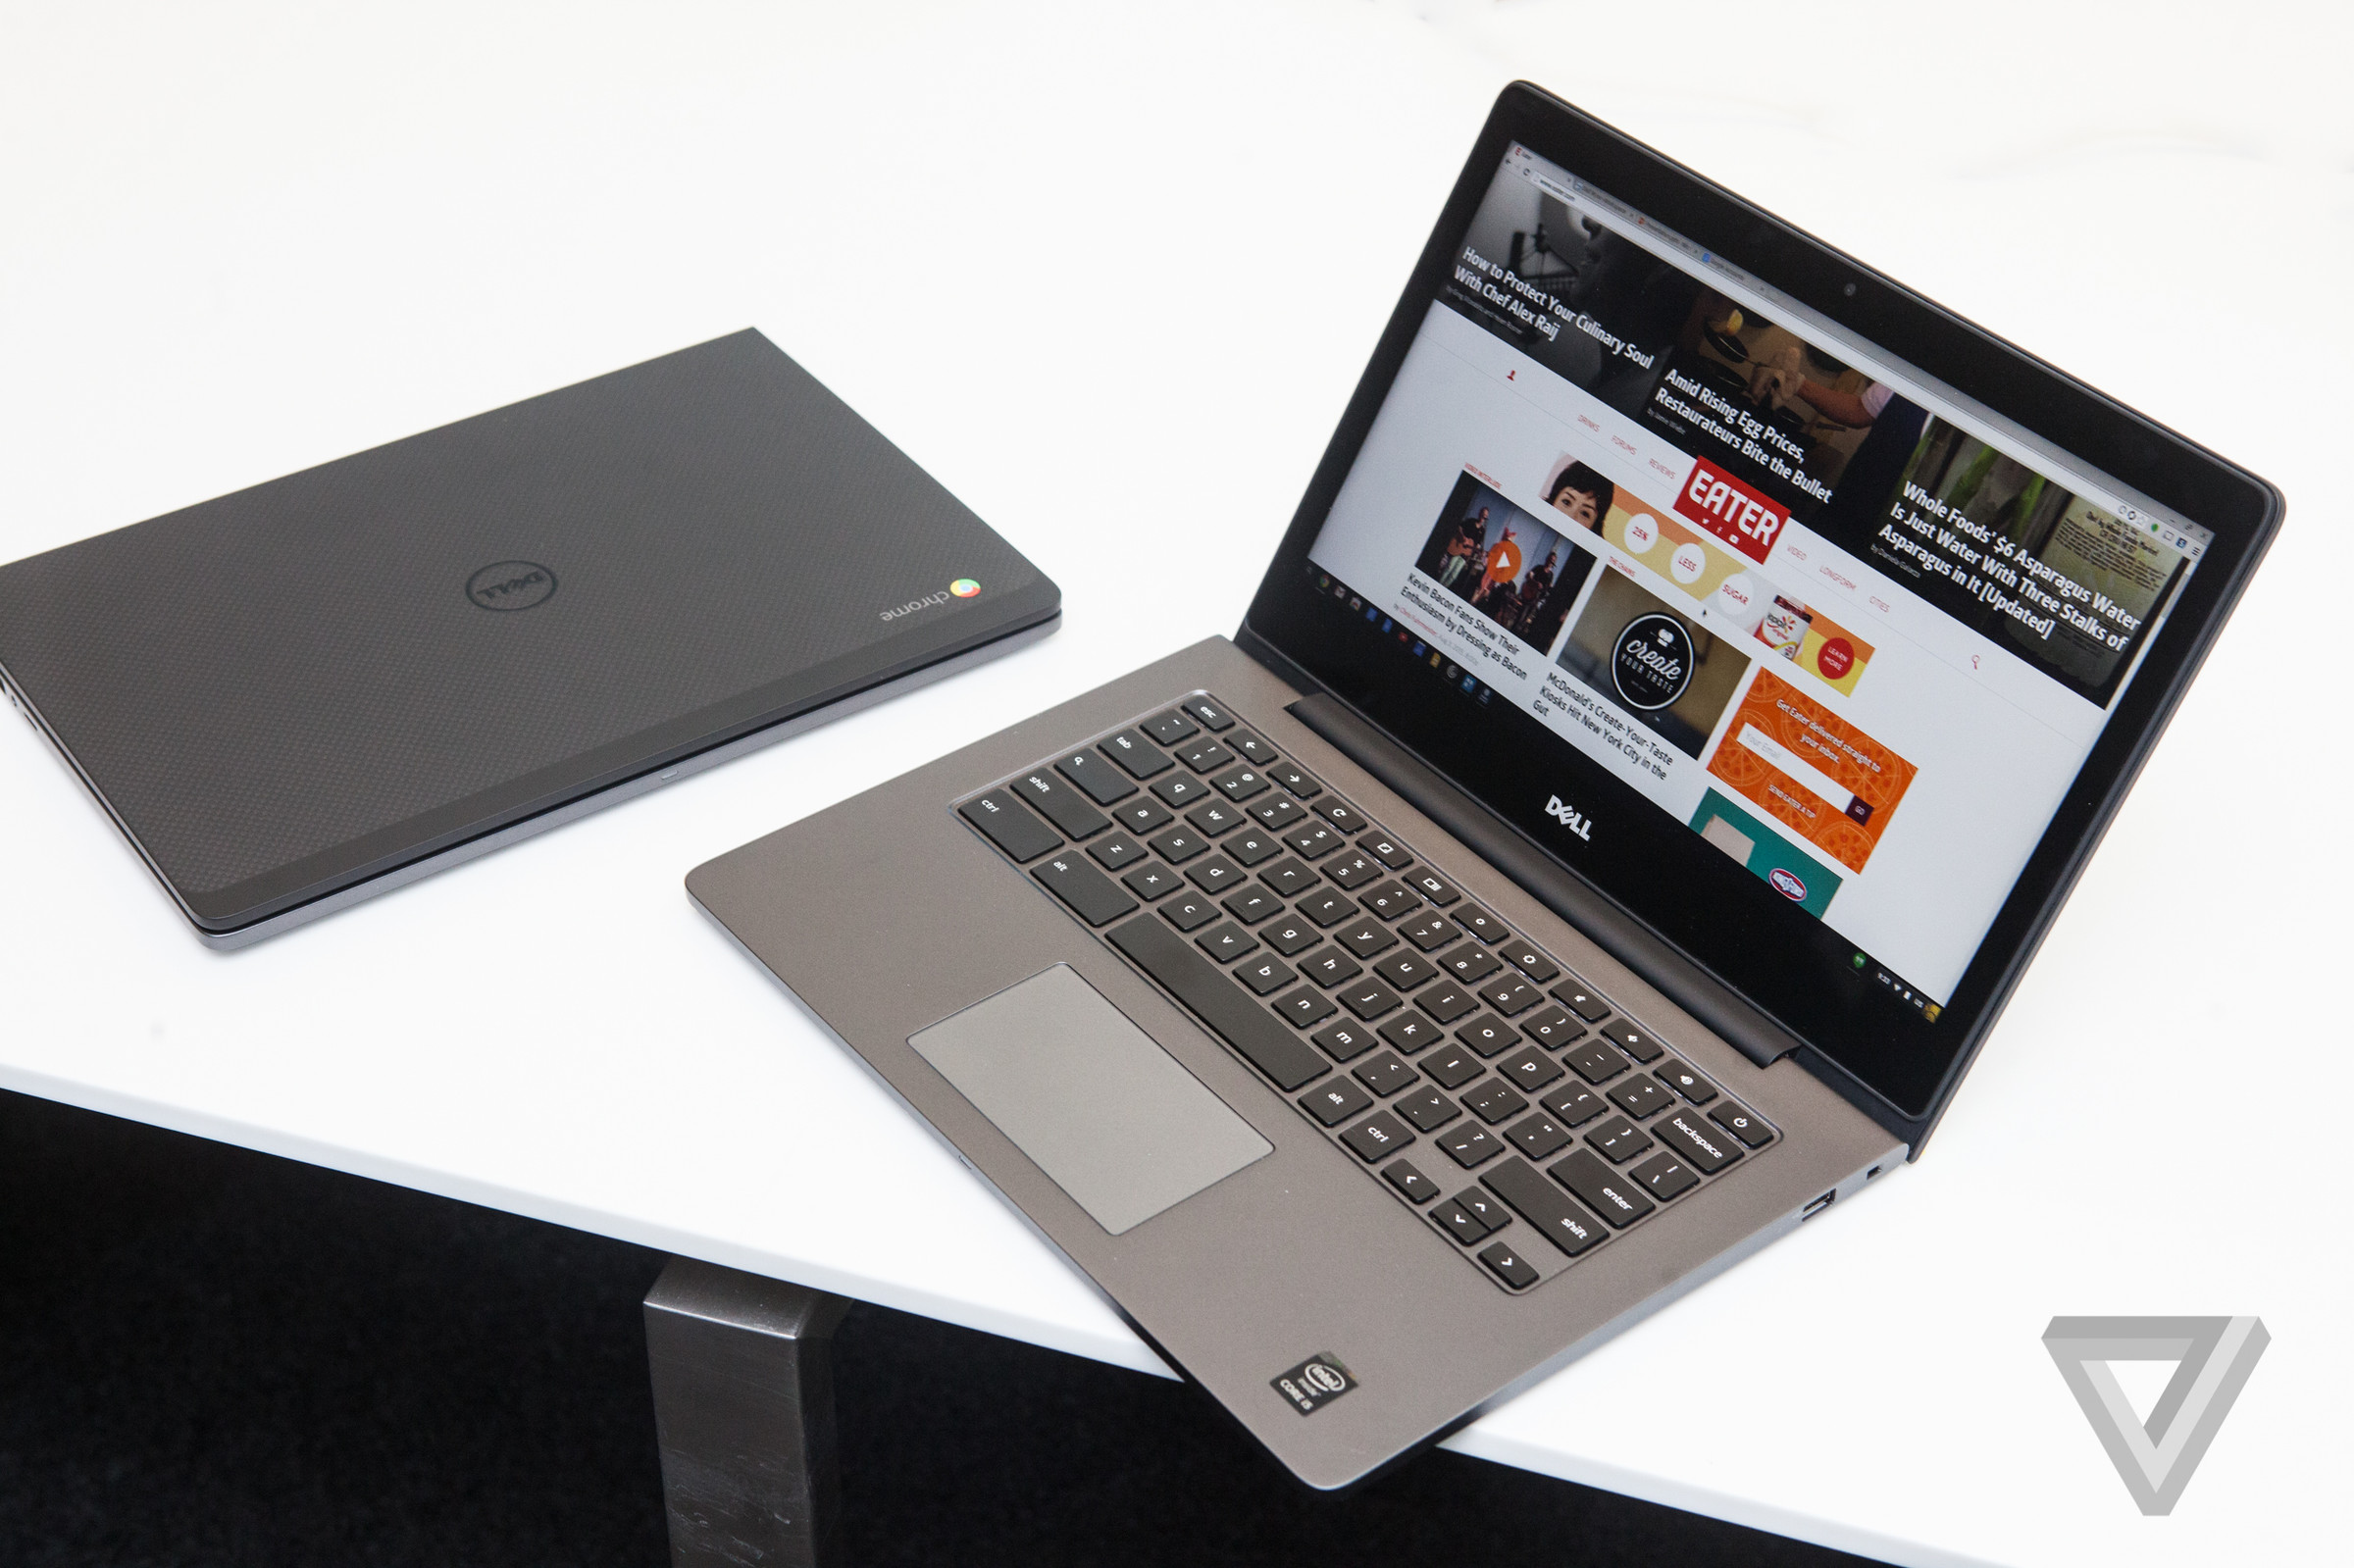 Dell Chromebook 13 hands-on photos